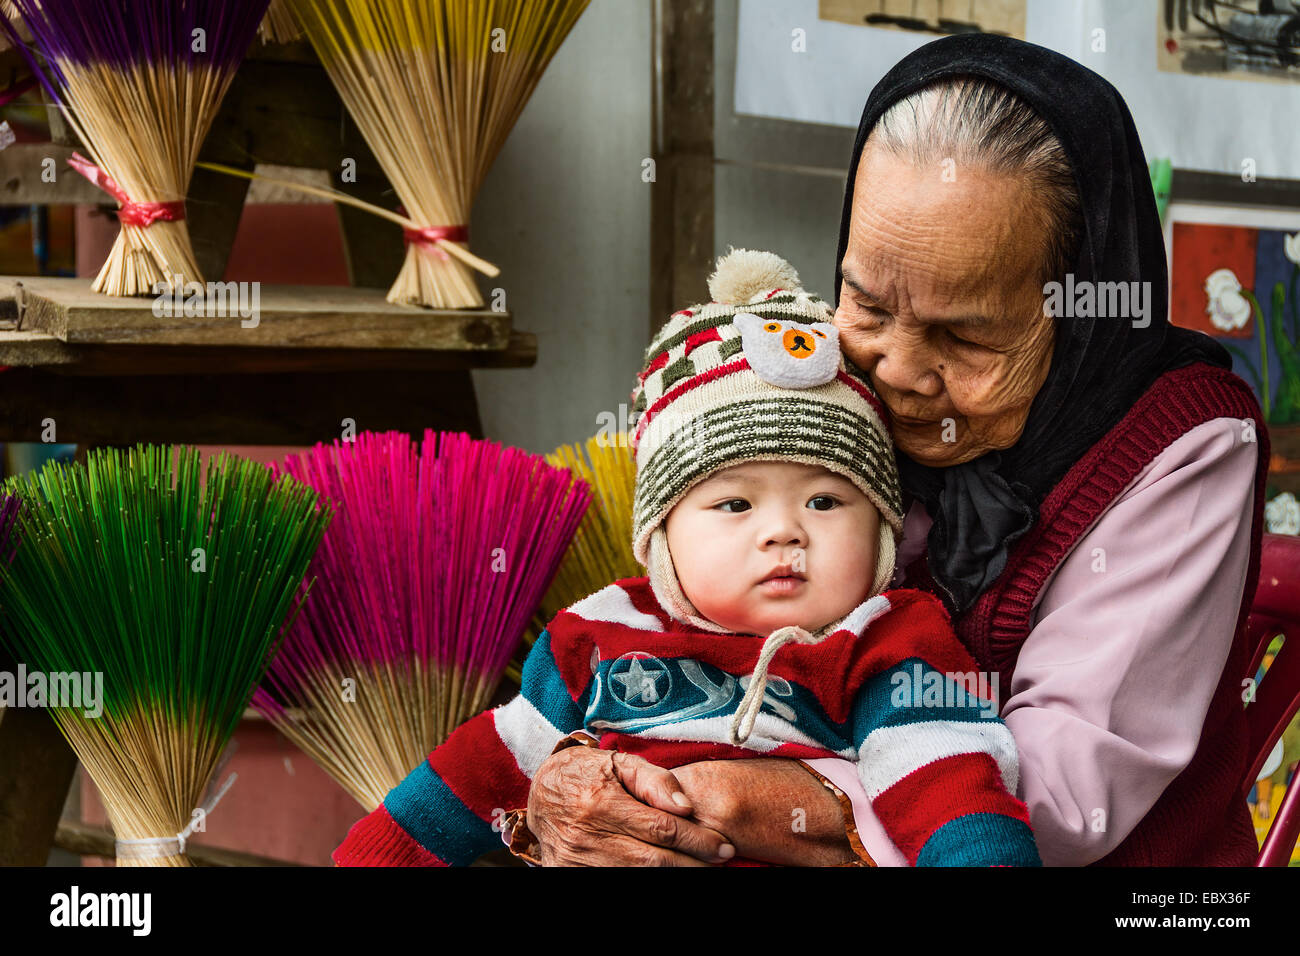 Vietnamese elderly lady with young child seated on her lap. Stock Photo